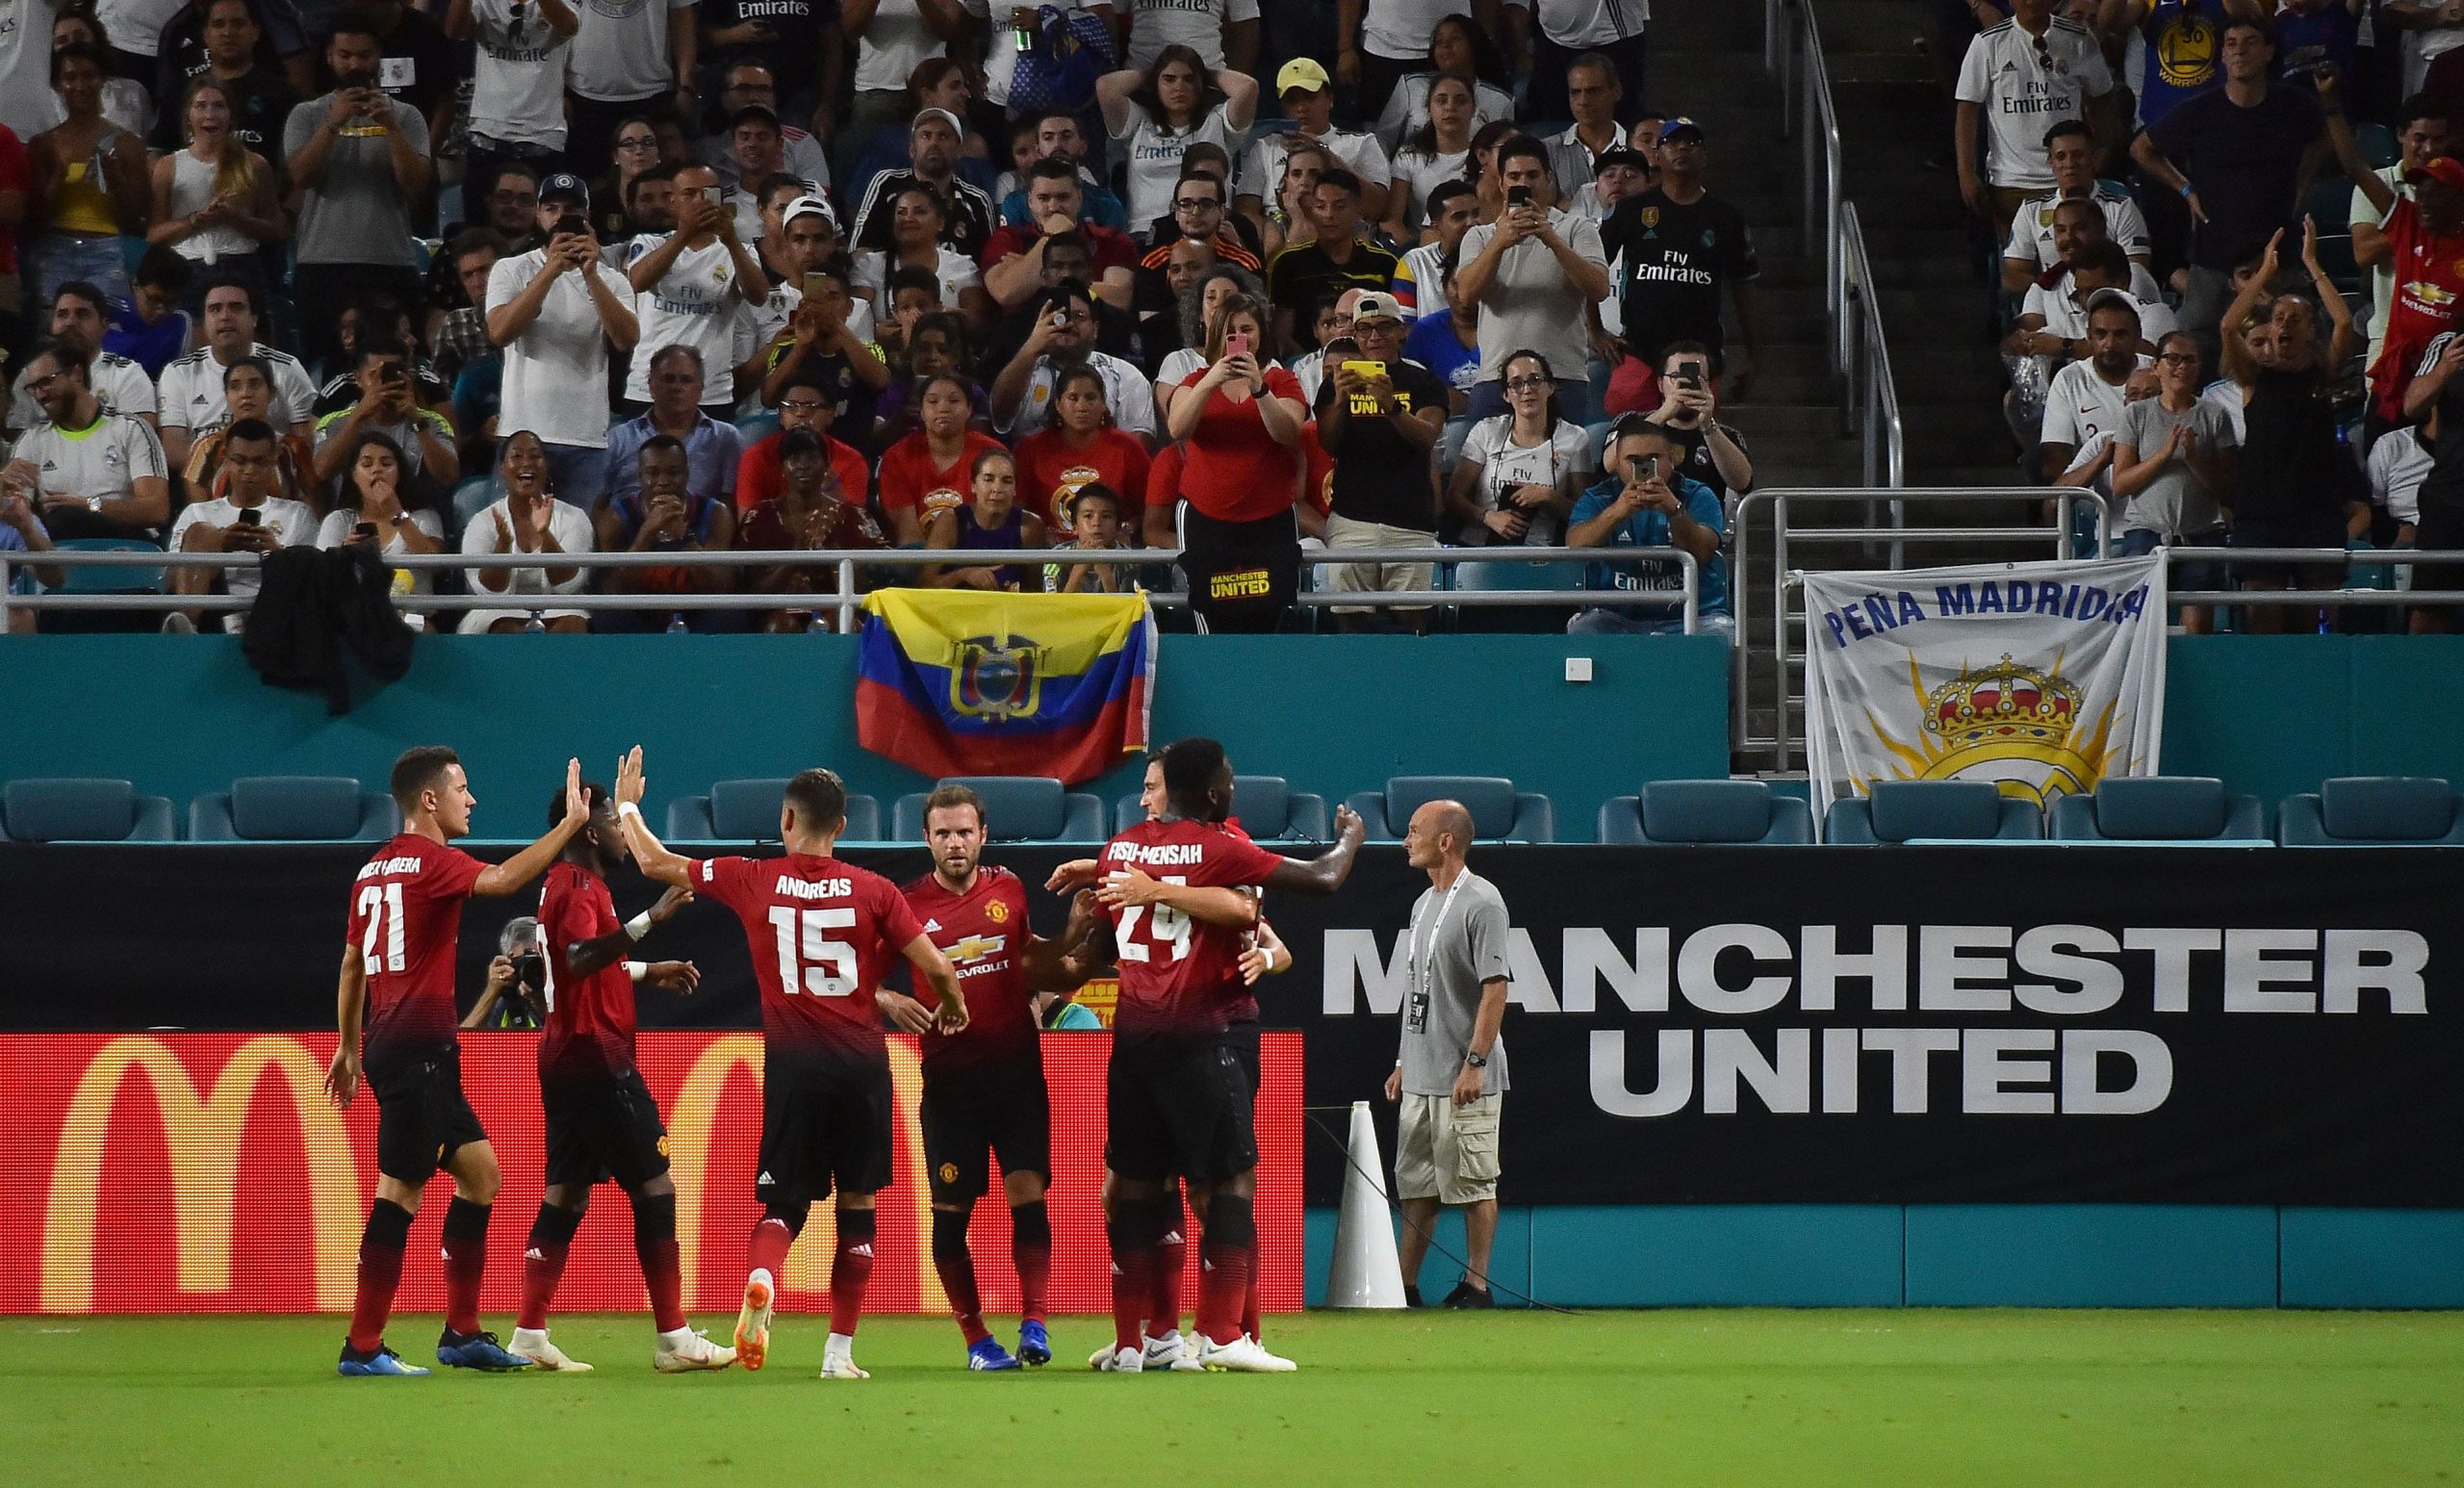 Manchester United teammates celebrate the goal of forward Alexis Sanchez (7) against Real Madrid during the first half of an International Champions Cup soccer match at Hard Rock Stadium.